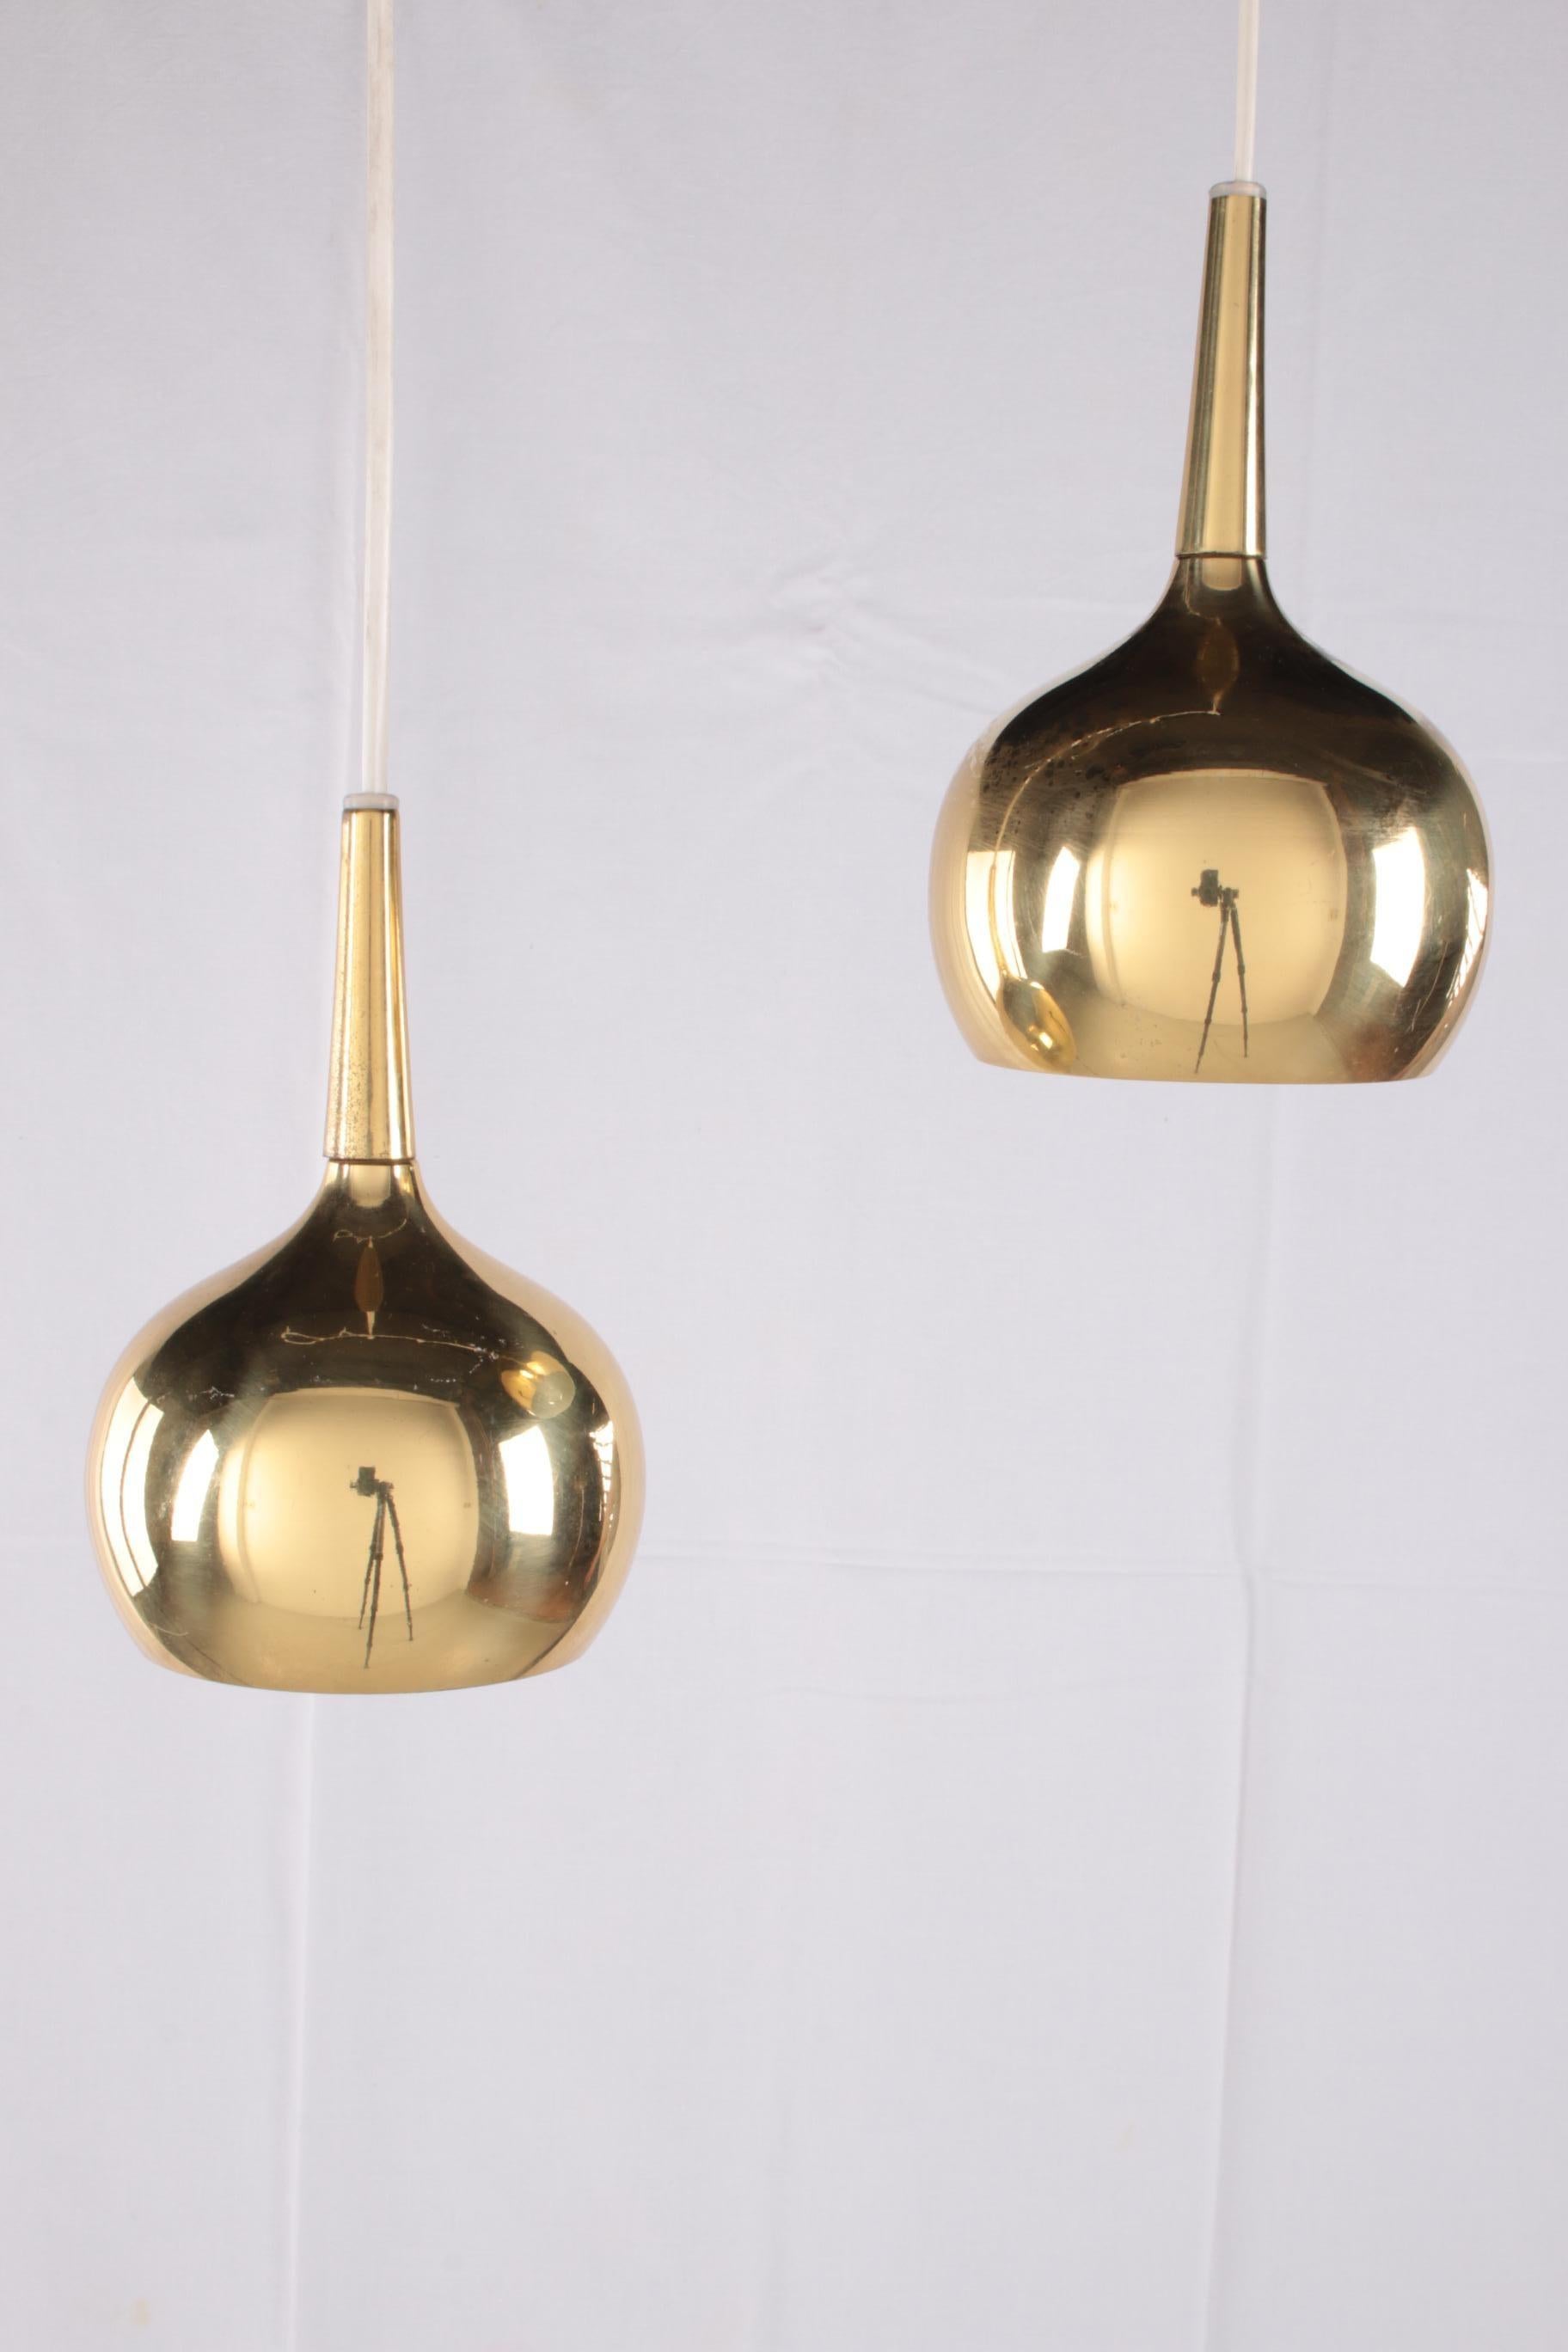 A brass pendant lamp set by the famous Swedish designer Hans-Agne Jakobsson for the lamp manufacturer Markaryd AB in the 1960s.

Hans-Agne Jakobsson was one of the most prolific lamp designers from the 1950s to the 1970s. He was one of the